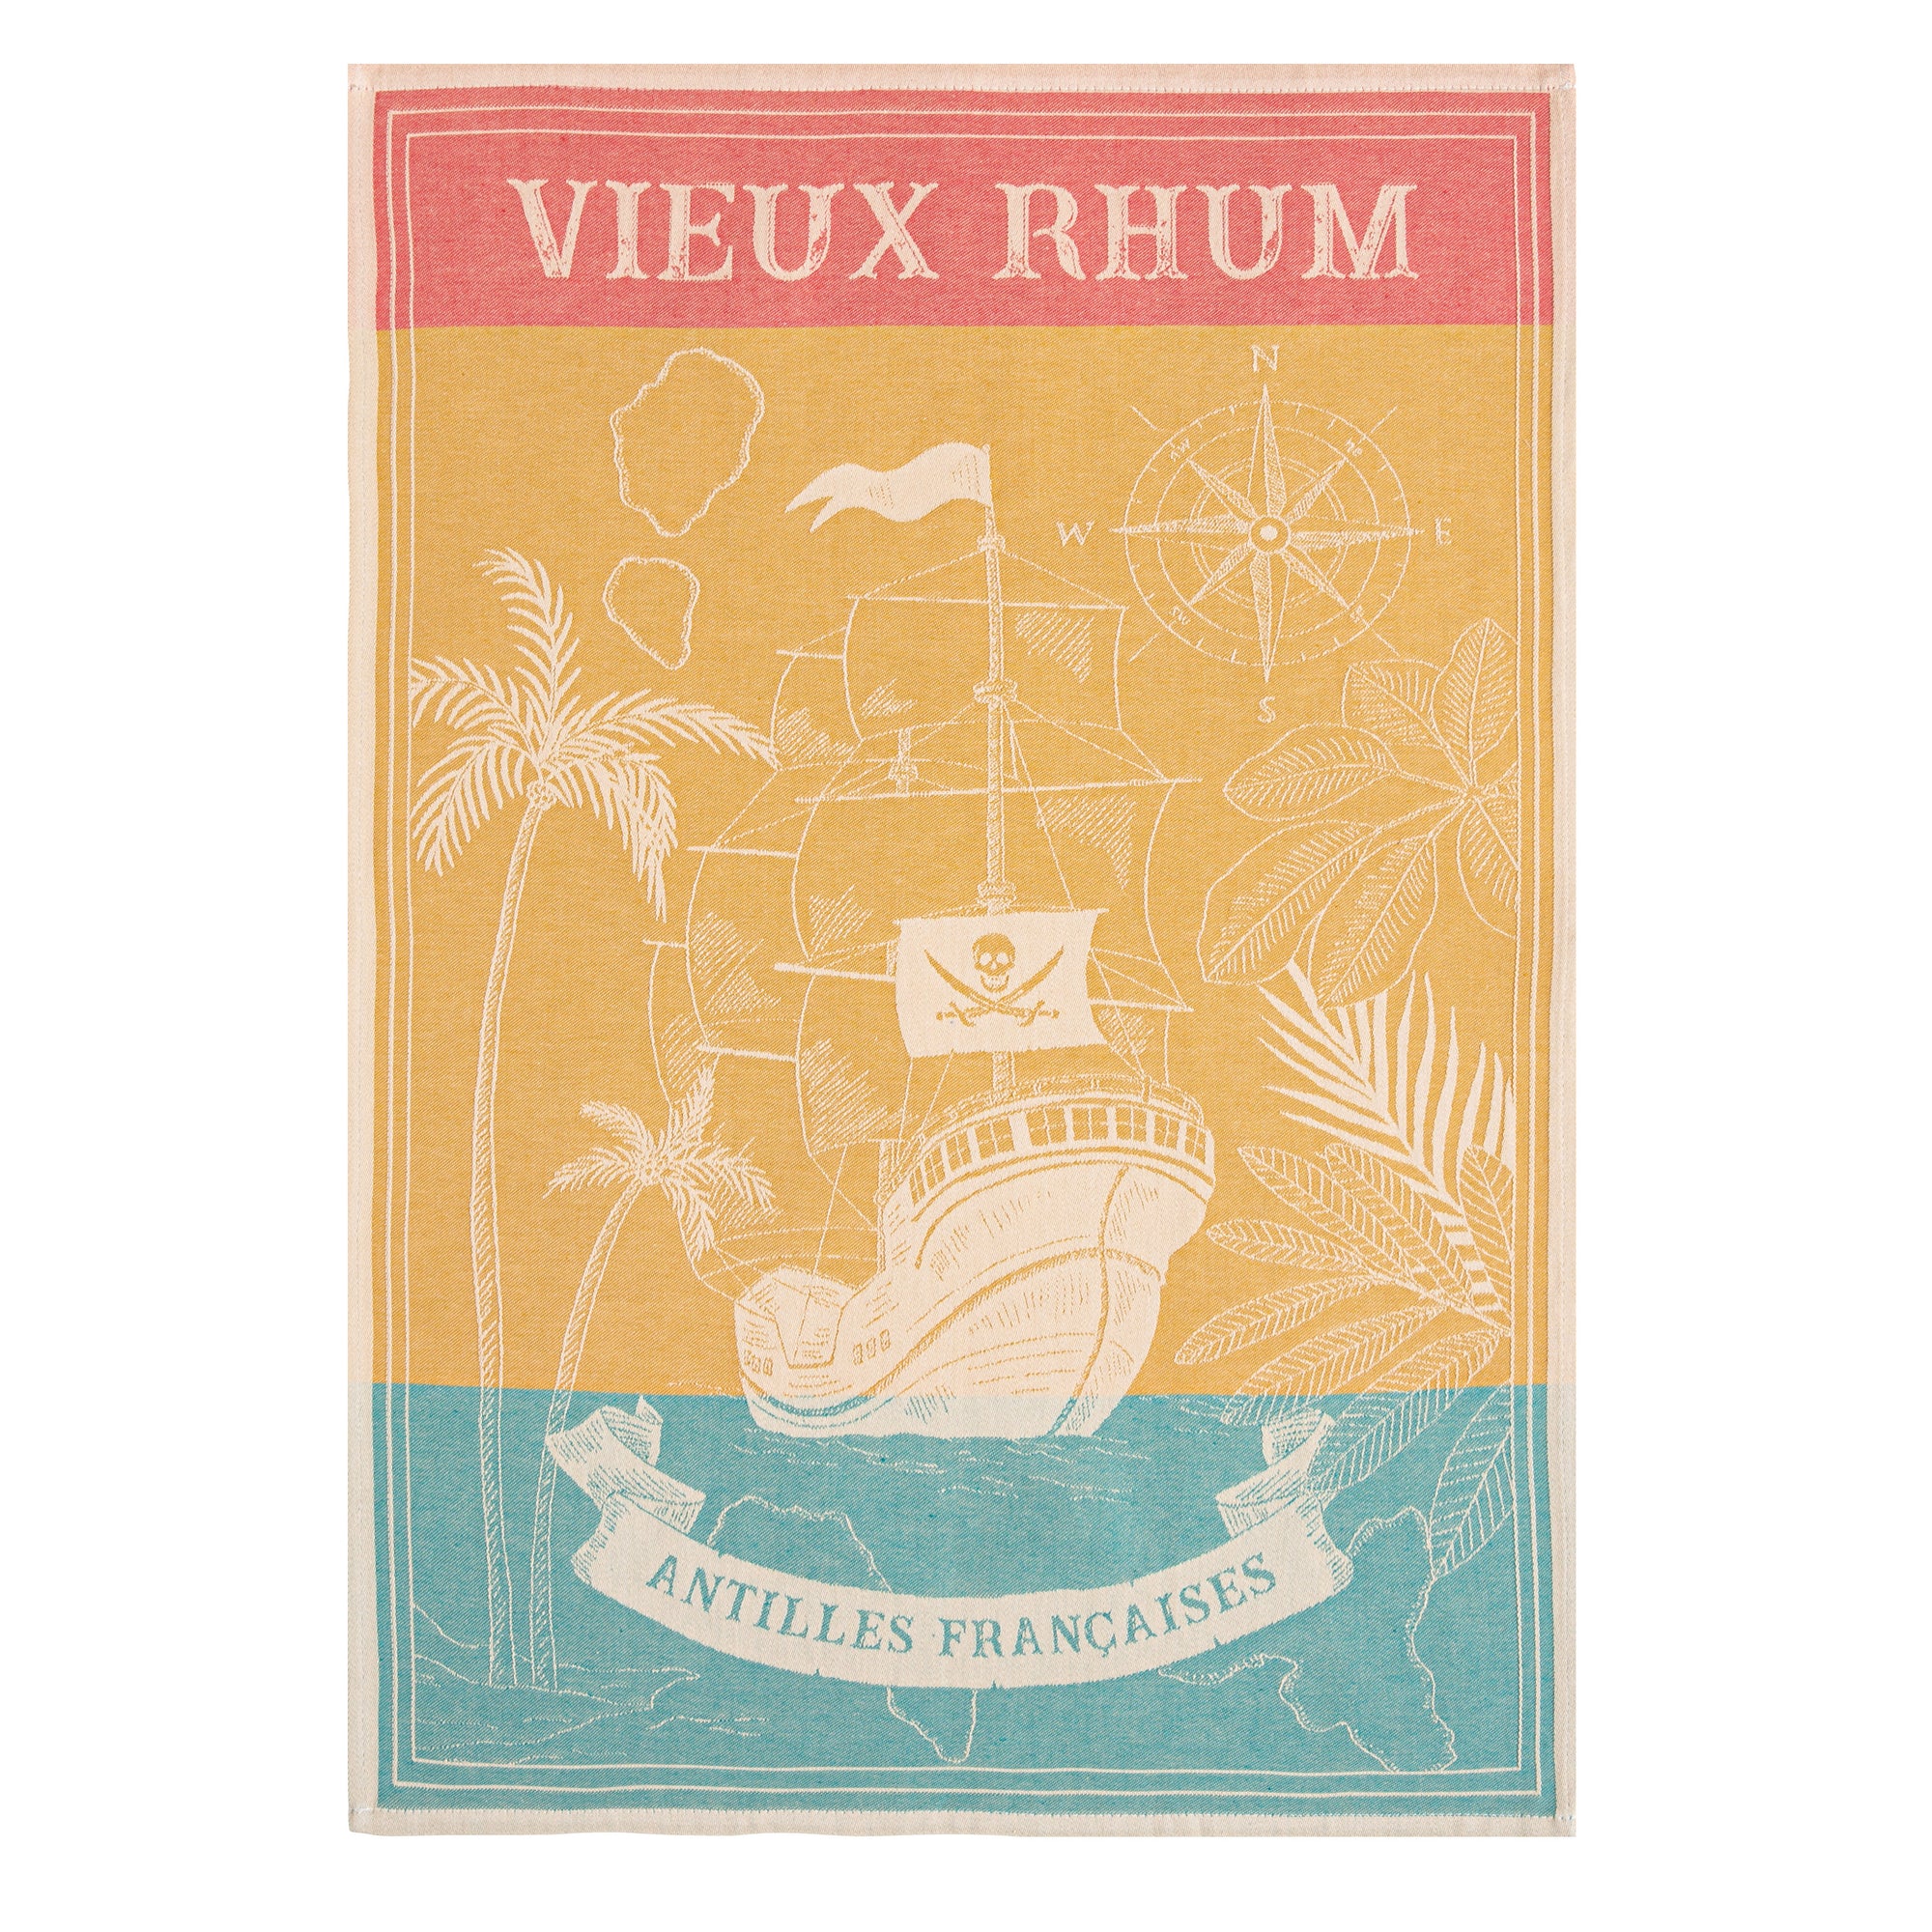 Aged Rum (Vieux Rhum) French Jacquard Cotton Dish Towel by Coucke